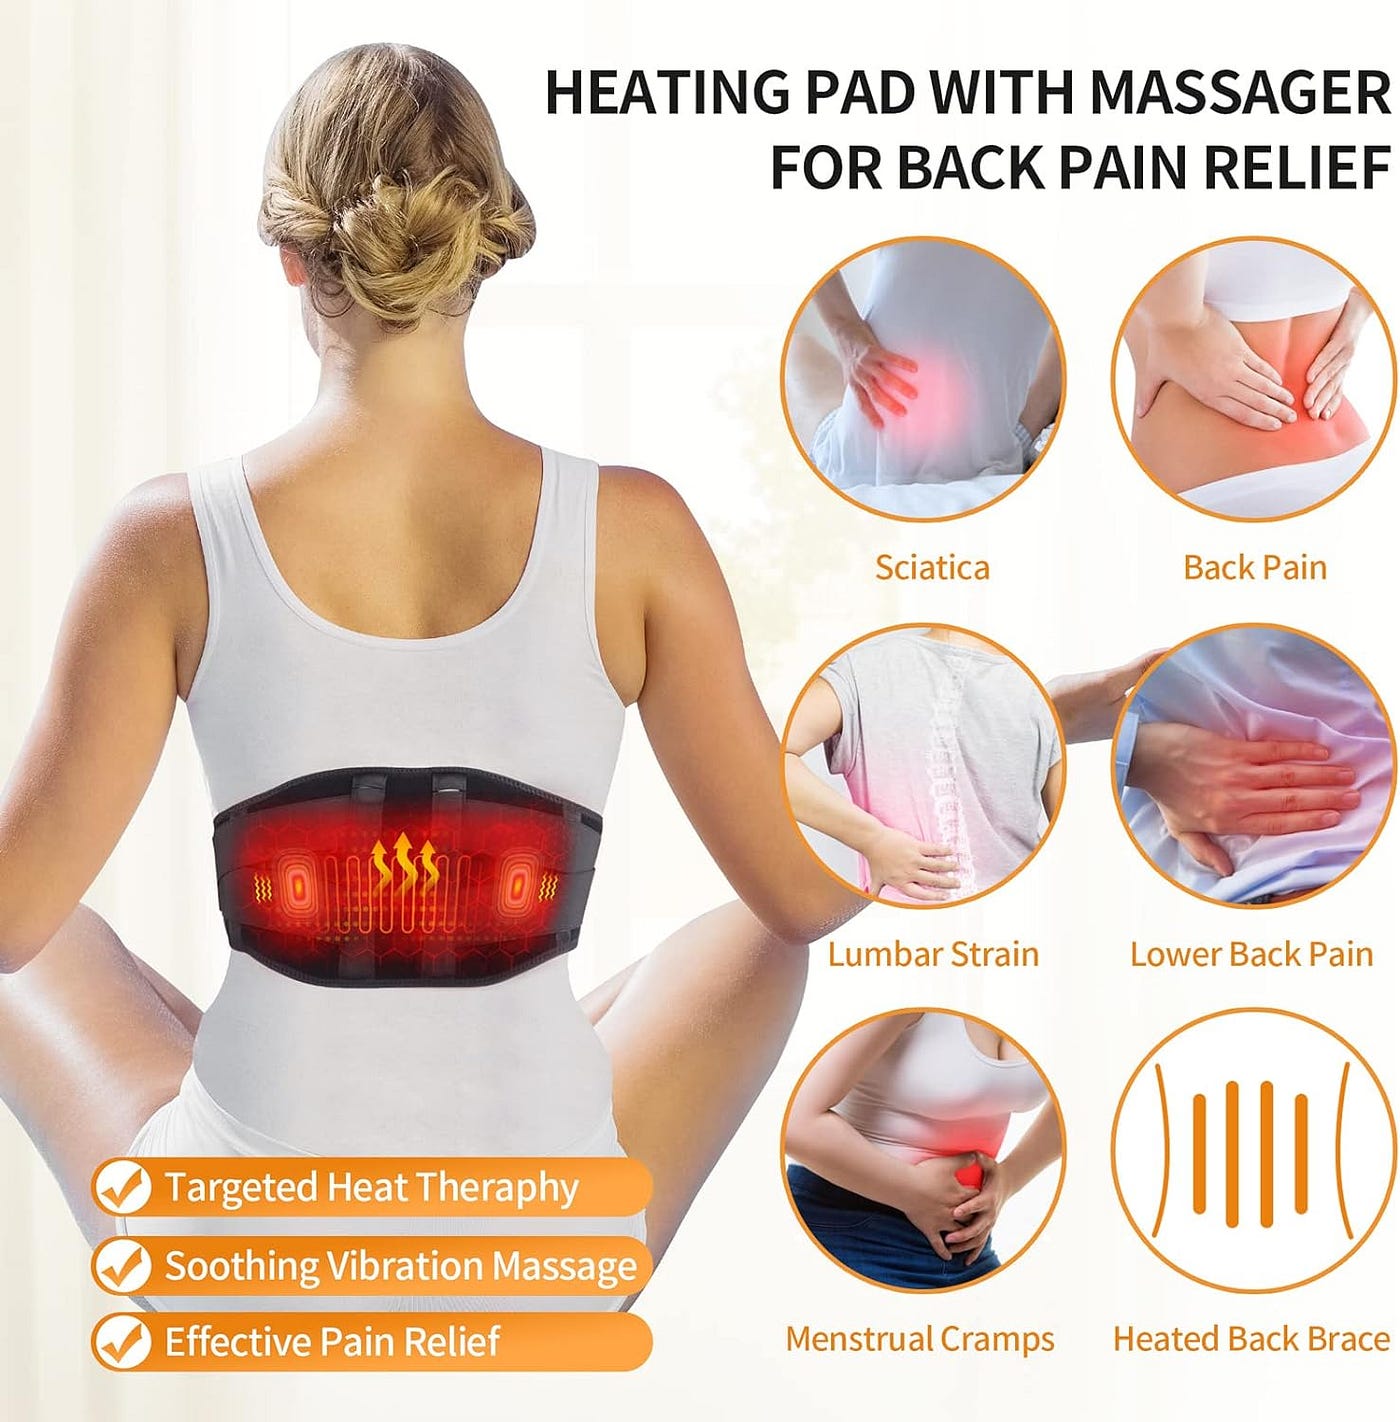 Relieve Your Back Pain with a Heated Back Brace - Henk Peter De Vries -  Medium